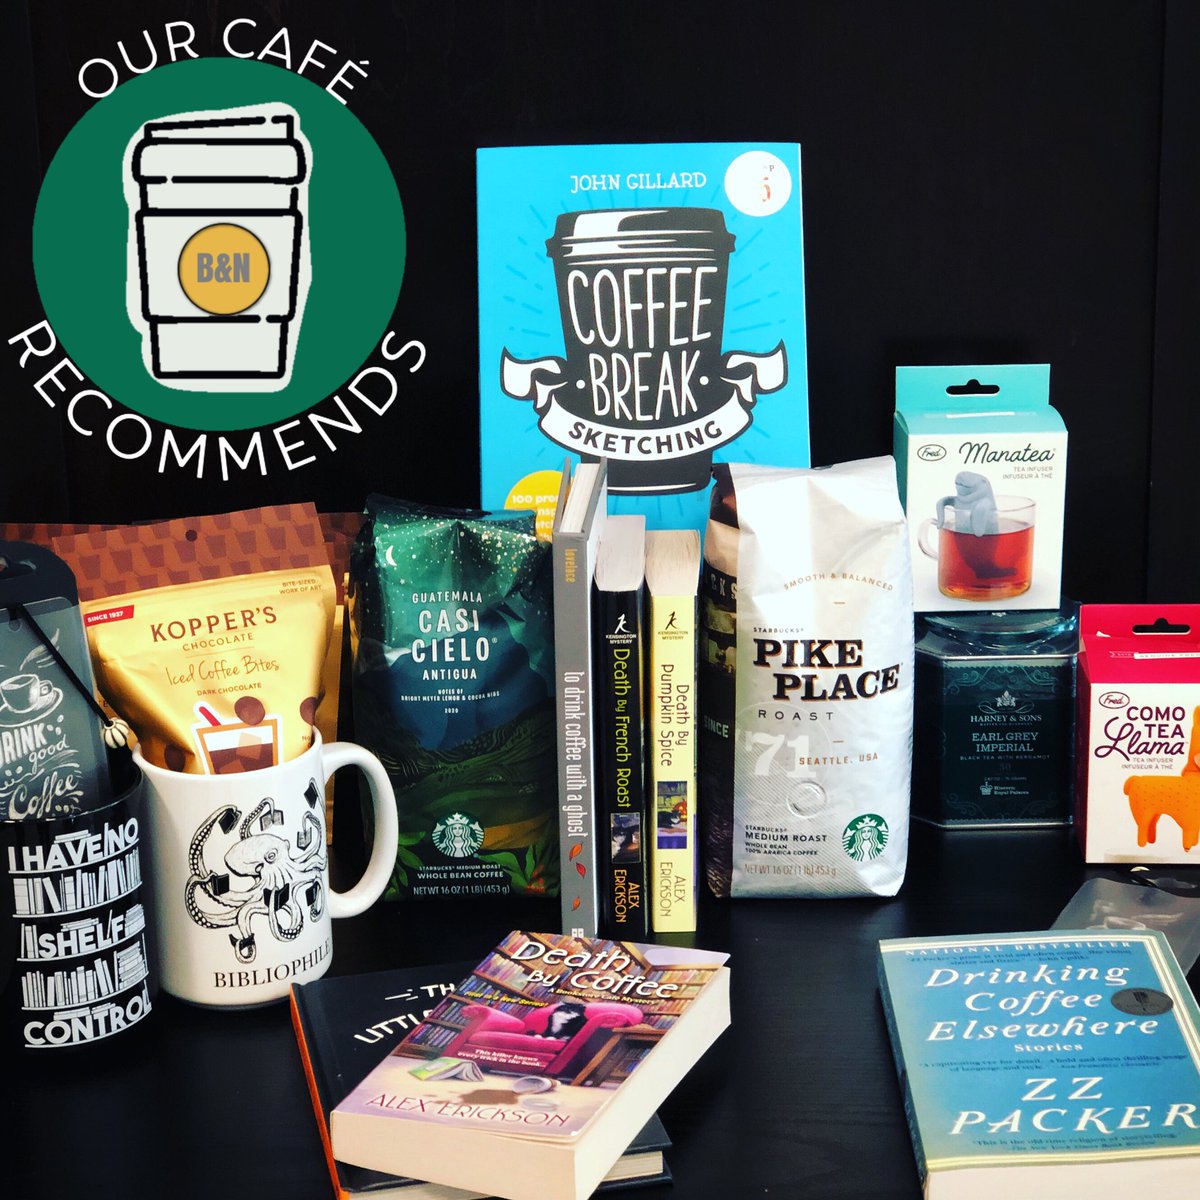 Happy Sunday Everyone! We asked one of our Baristas to set up a table of café recommendations and the coffee force is definitely strong with this one! 🤎☕️📔
—
#coffeelover #wereccomend #bookswelove #cozymystery #sketchbook #bnbuzz #bncafe #allthingscoffee #baristalife